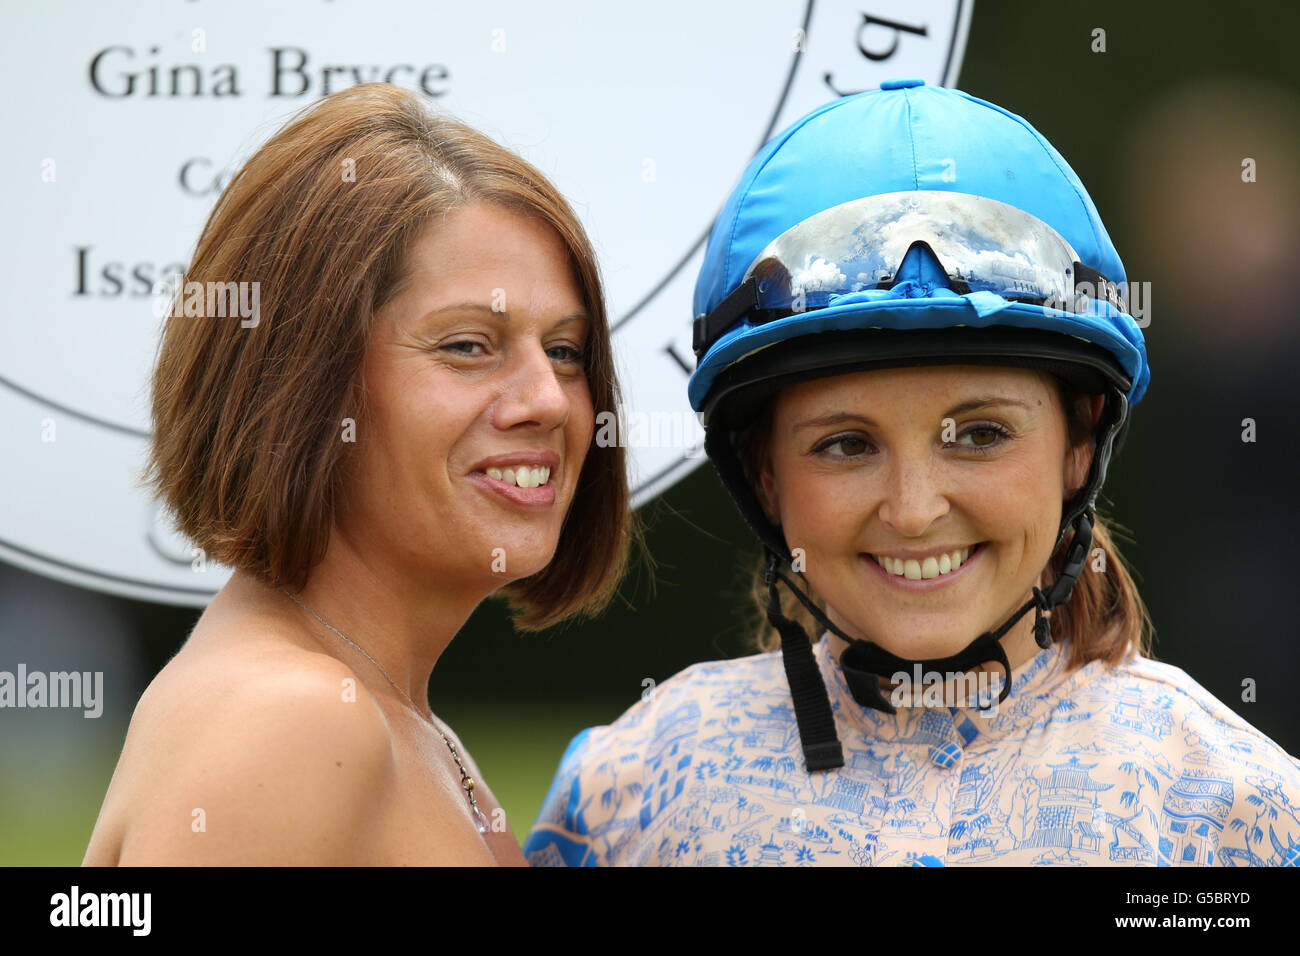 Horseracing presenter Gina Bryce (right) during Ladies Day of the Glorious Goodwood Festival at Goodwood Racecourse, Chichester. Stock Photo